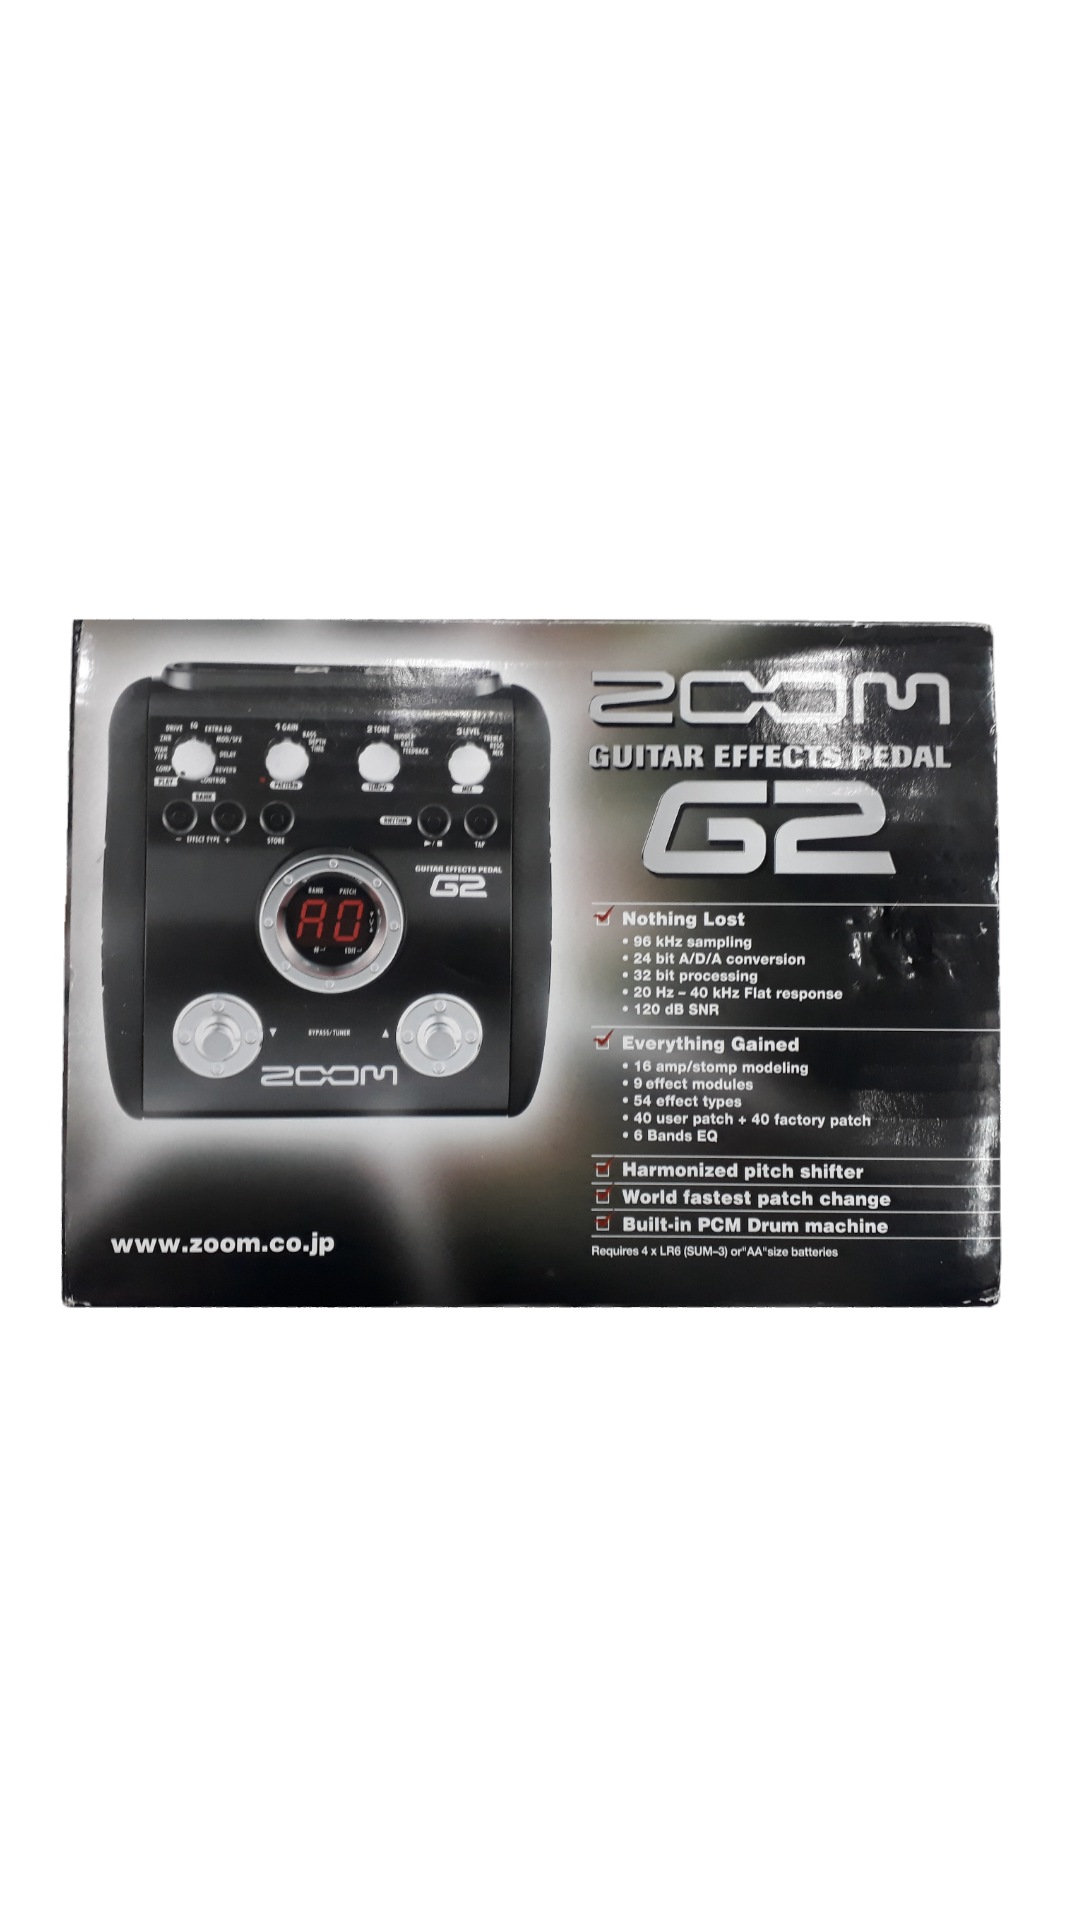 PEDALEIRA ZOOM G2 /! IMPORT